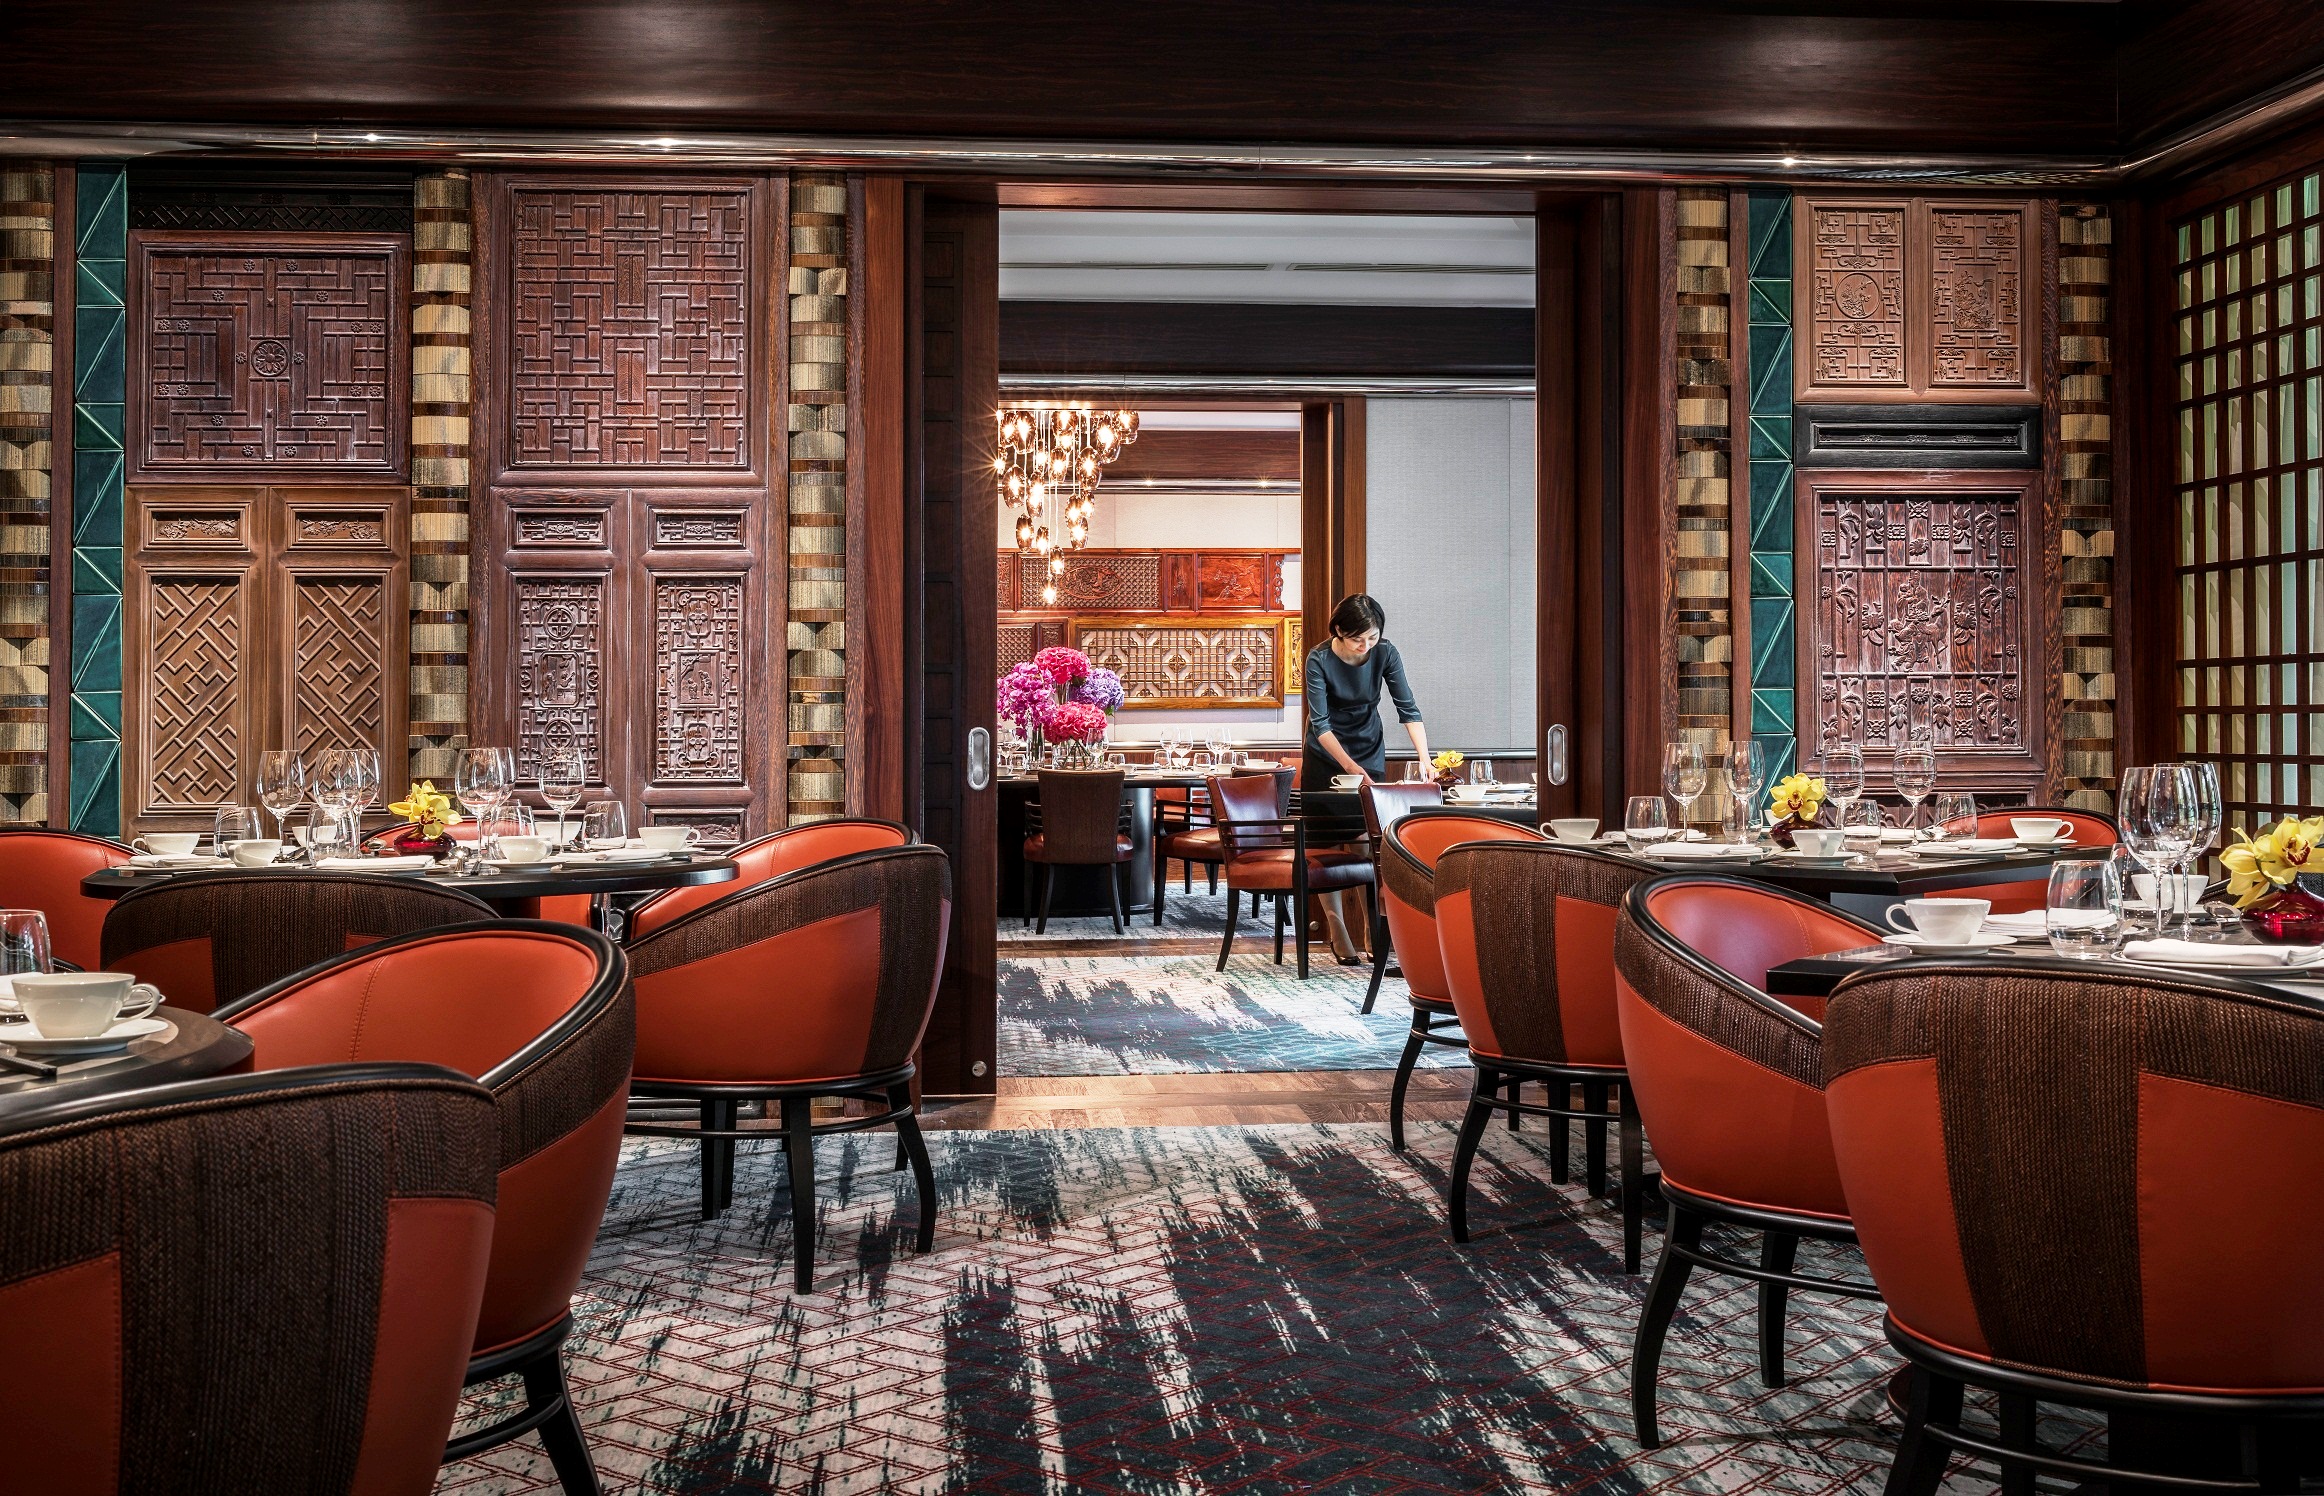 Four Seasons Hotel is home to the Michelin-starred Jiang-Nan Chun, a fine-dining establishment that serves up Cantonese delicacies